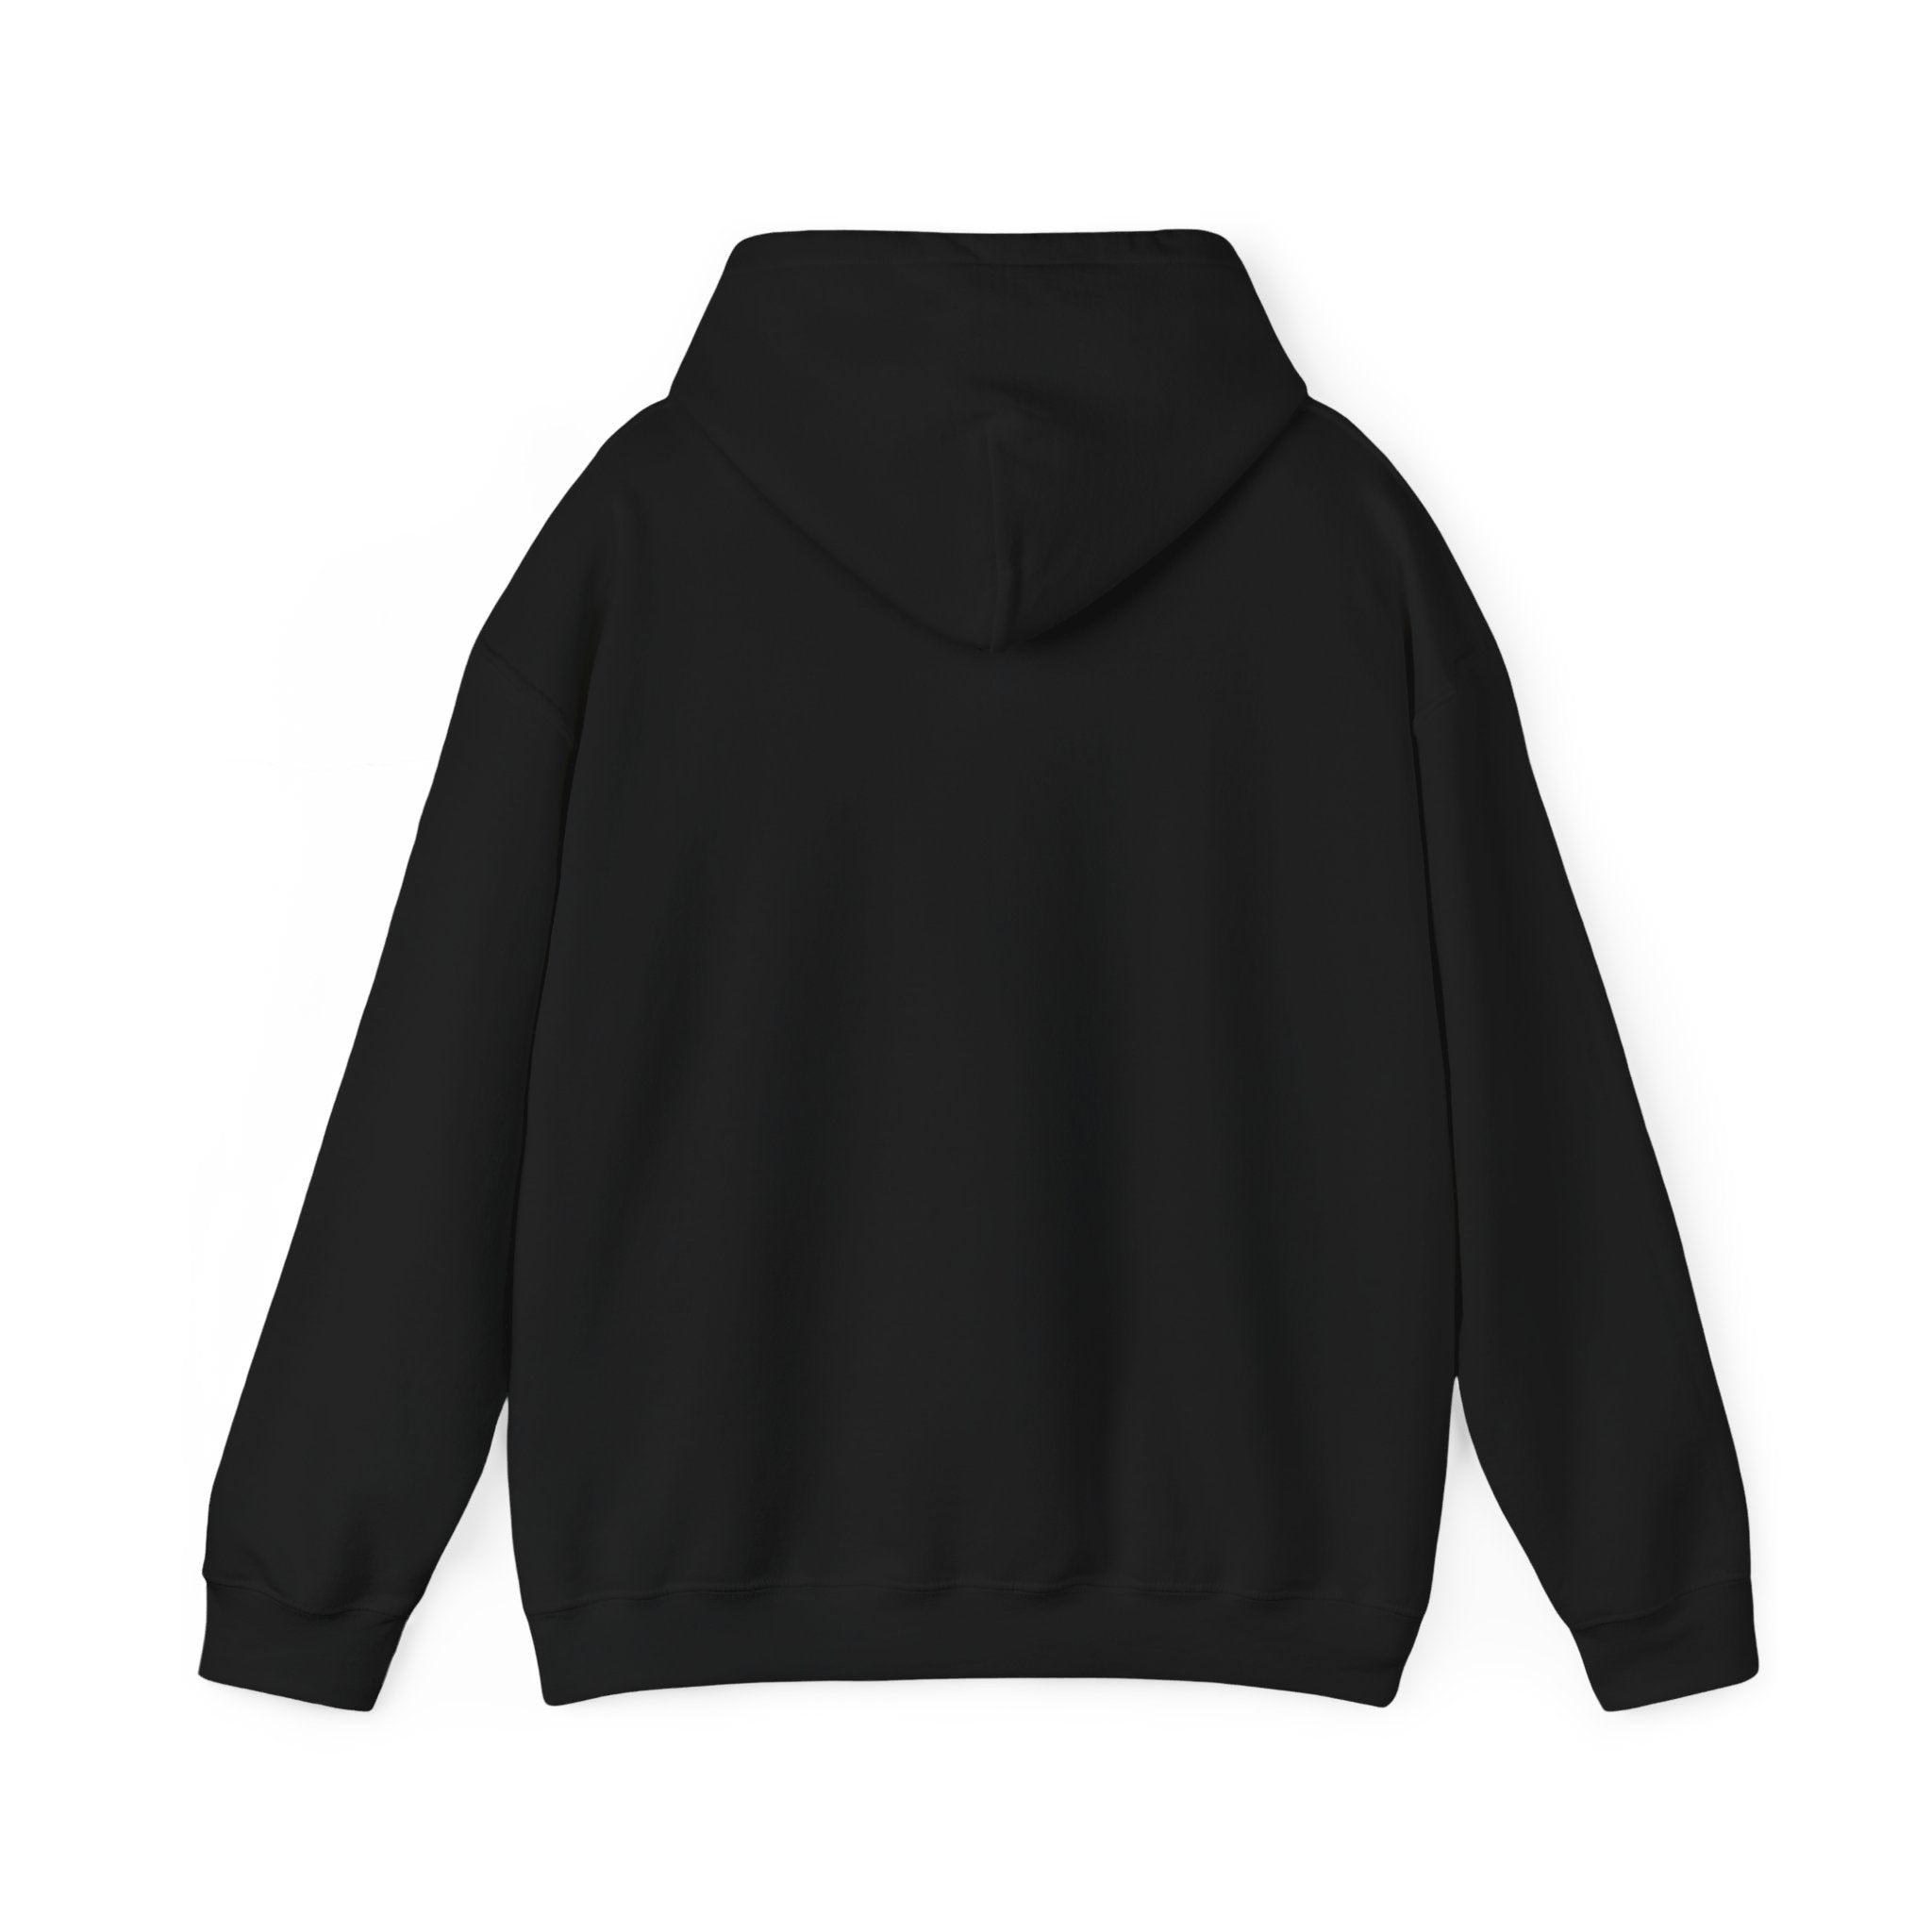 Back view of the RU - Hooded Sweatshirt in plain black, offering ultimate comfort with its hood and long sleeves, displayed on a white background.